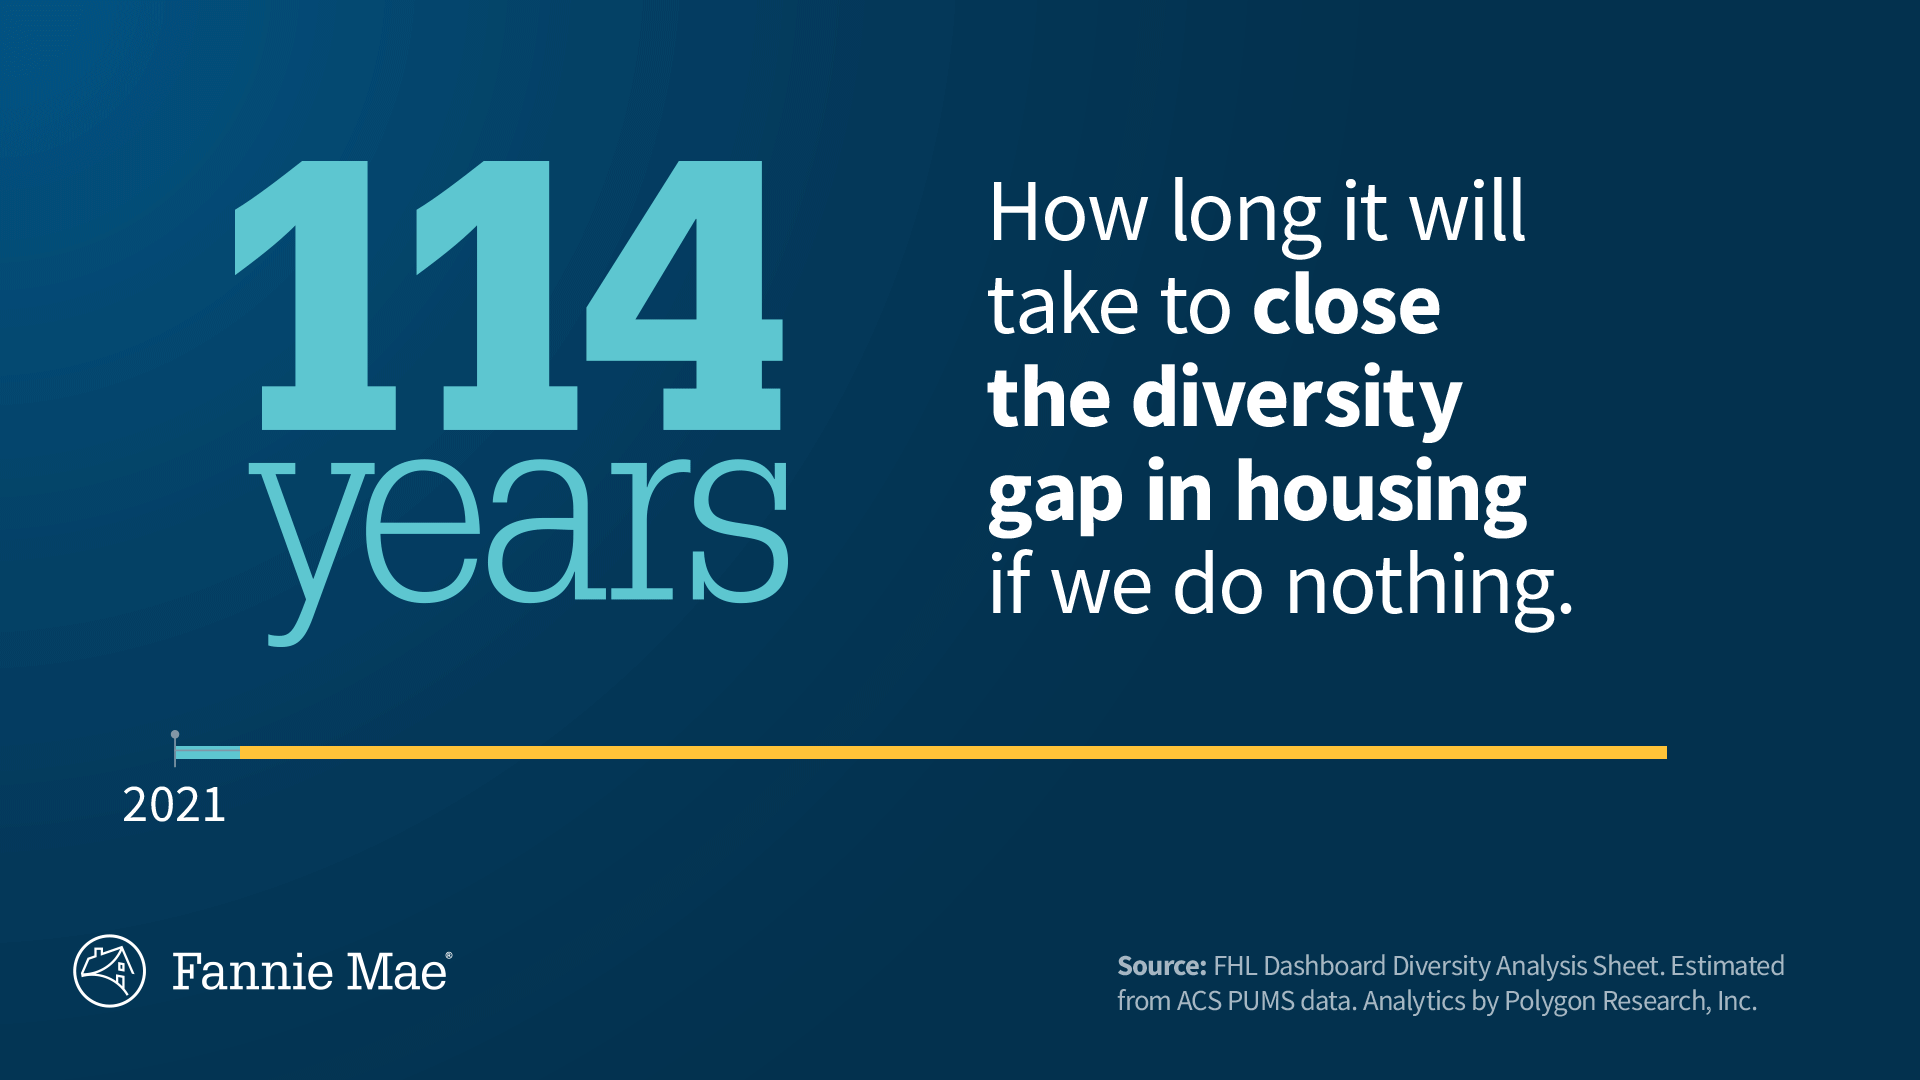 If we do nothing, closing the diversity gap will take 114 years